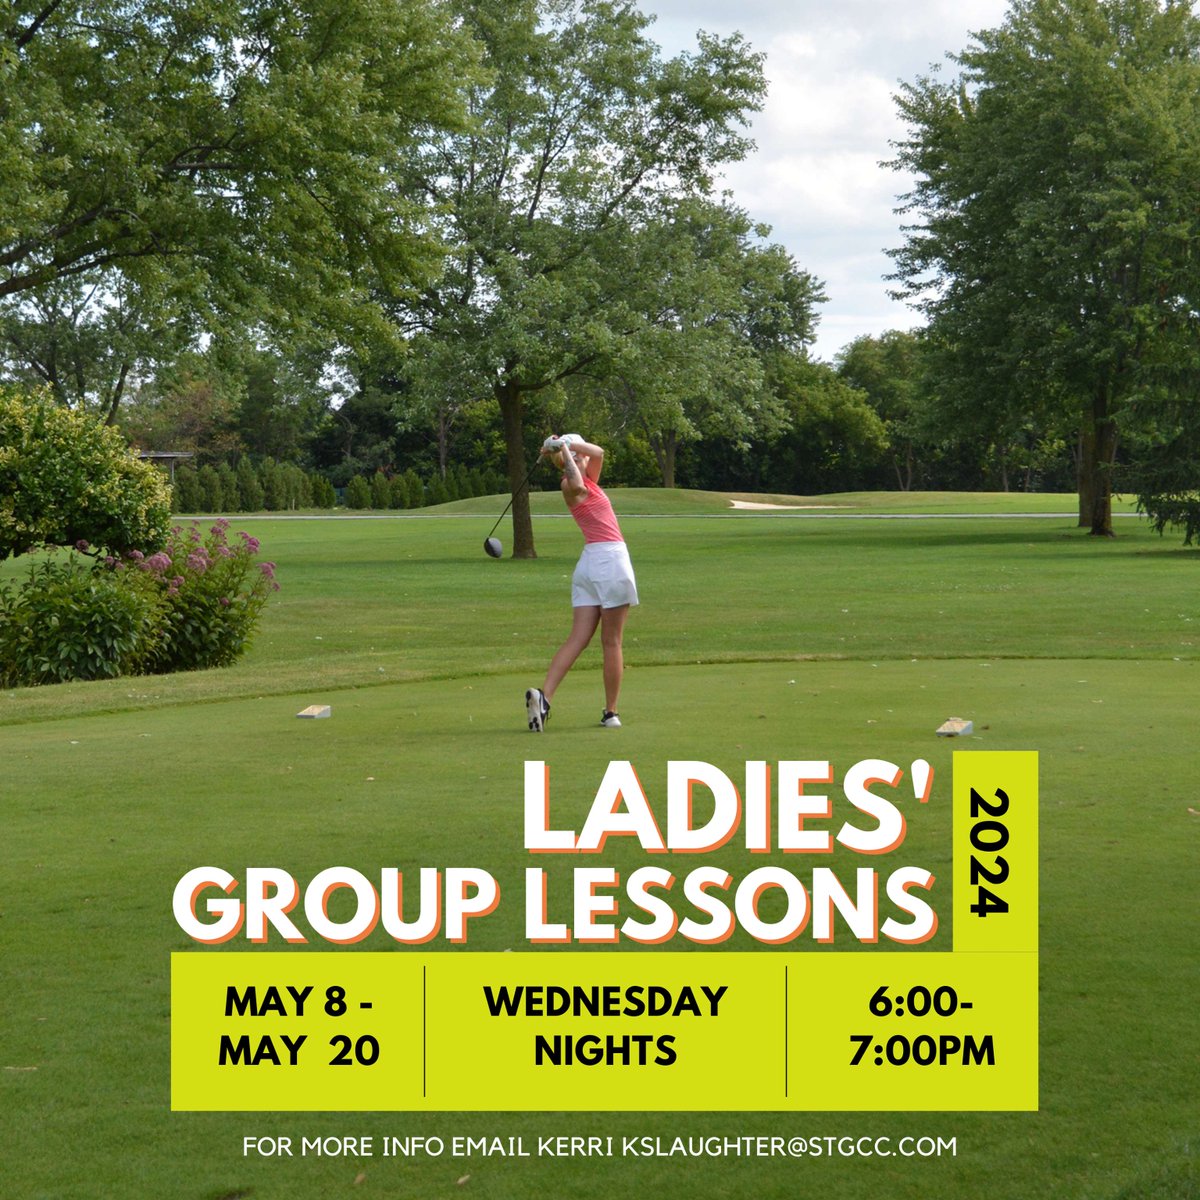 Attention ladies!
Learn and improve your game in a welcoming, fun, group setting.
Join Kerri and Zach Wednesdays from 6:00 - 7:00 pm, four group sessions in total starting May 8th.
To register email Kerri at kslaughter@stgcc.com

#stcgcc #golflessons